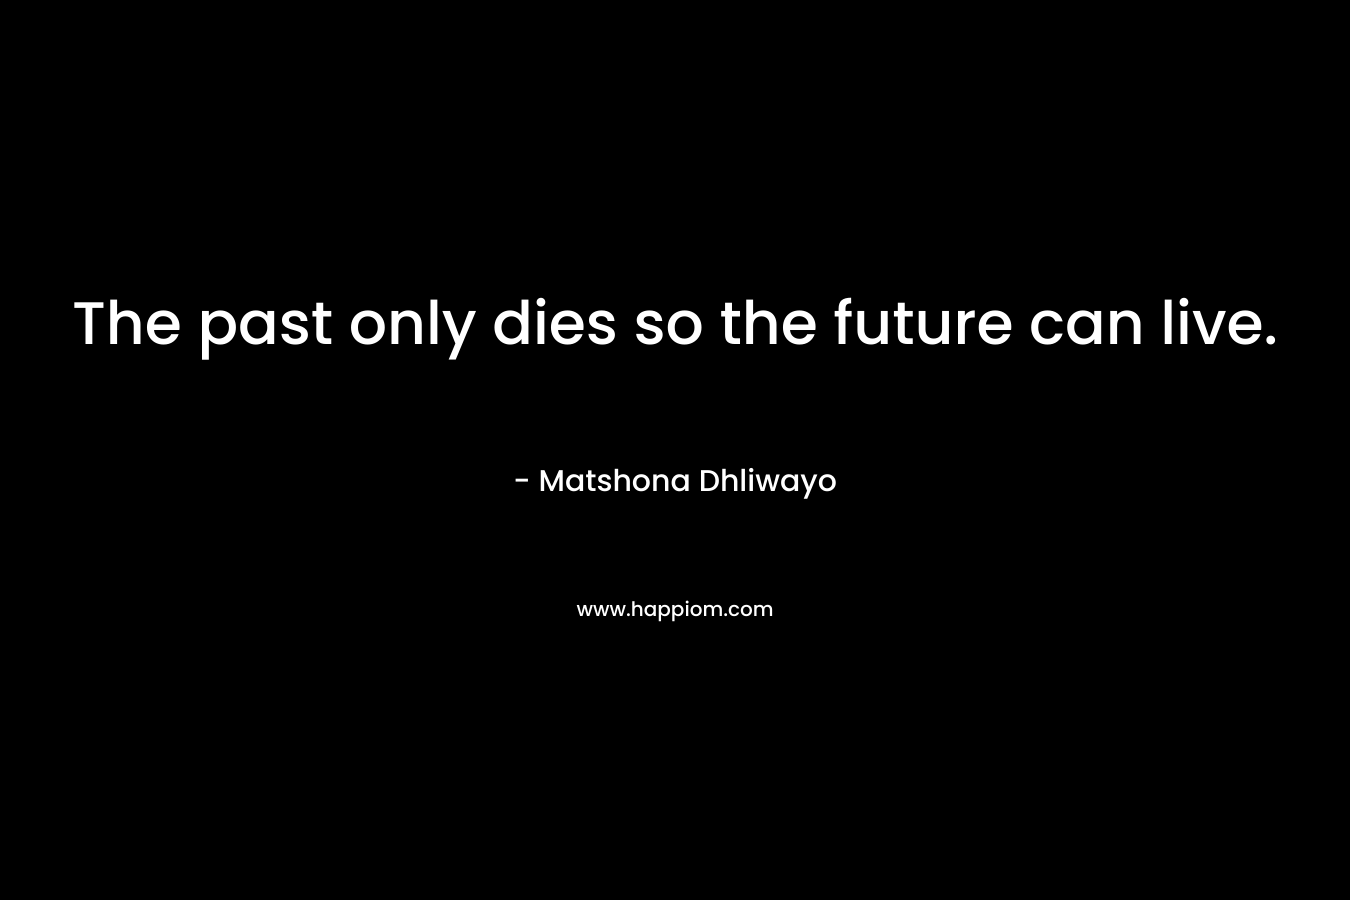 The past only dies so the future can live.